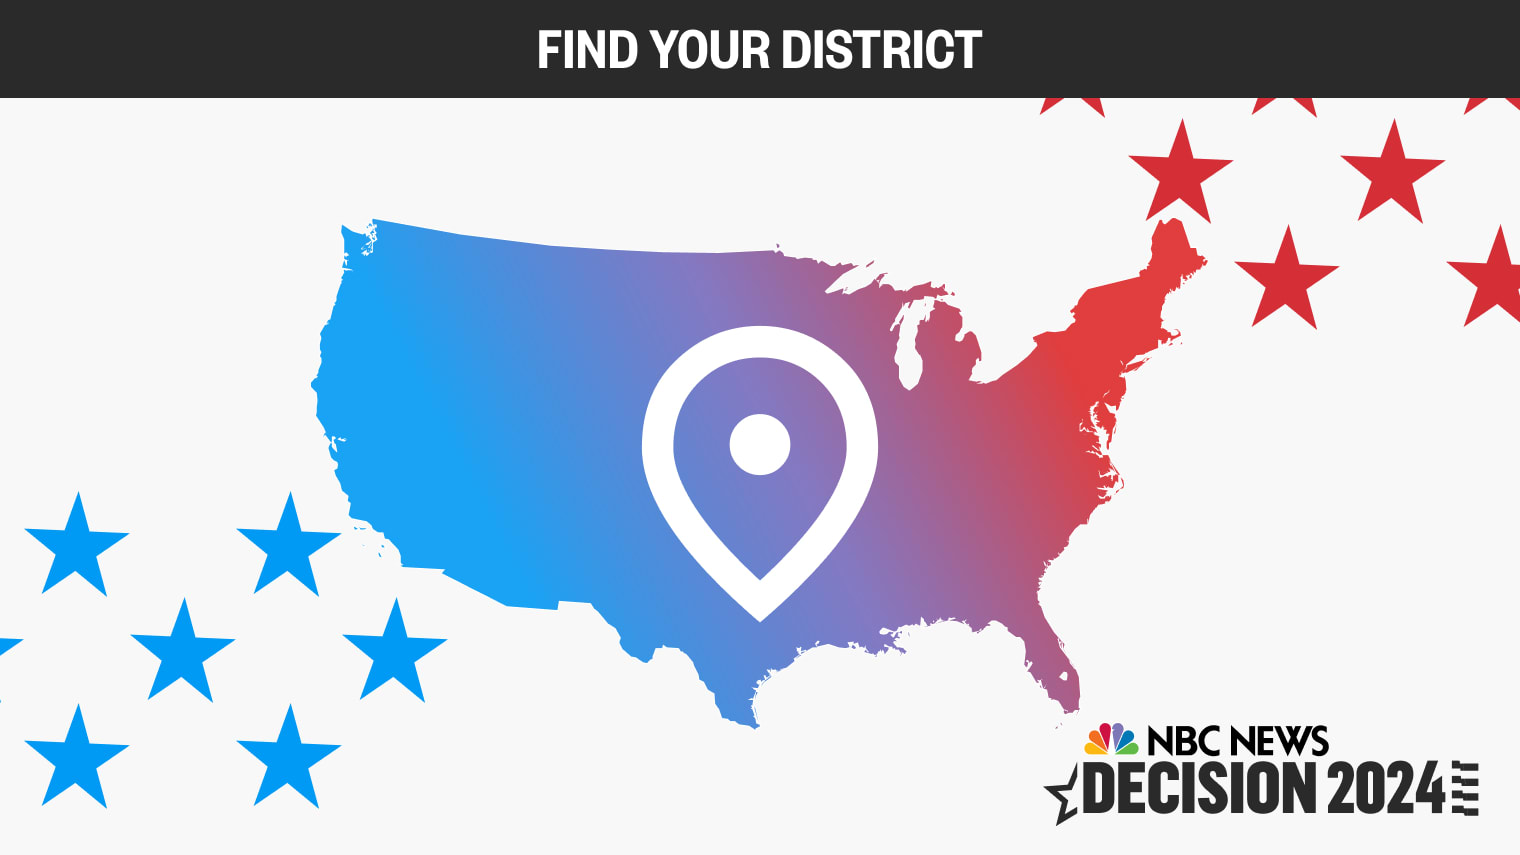 Congressional District Map: Enter your address and find your district